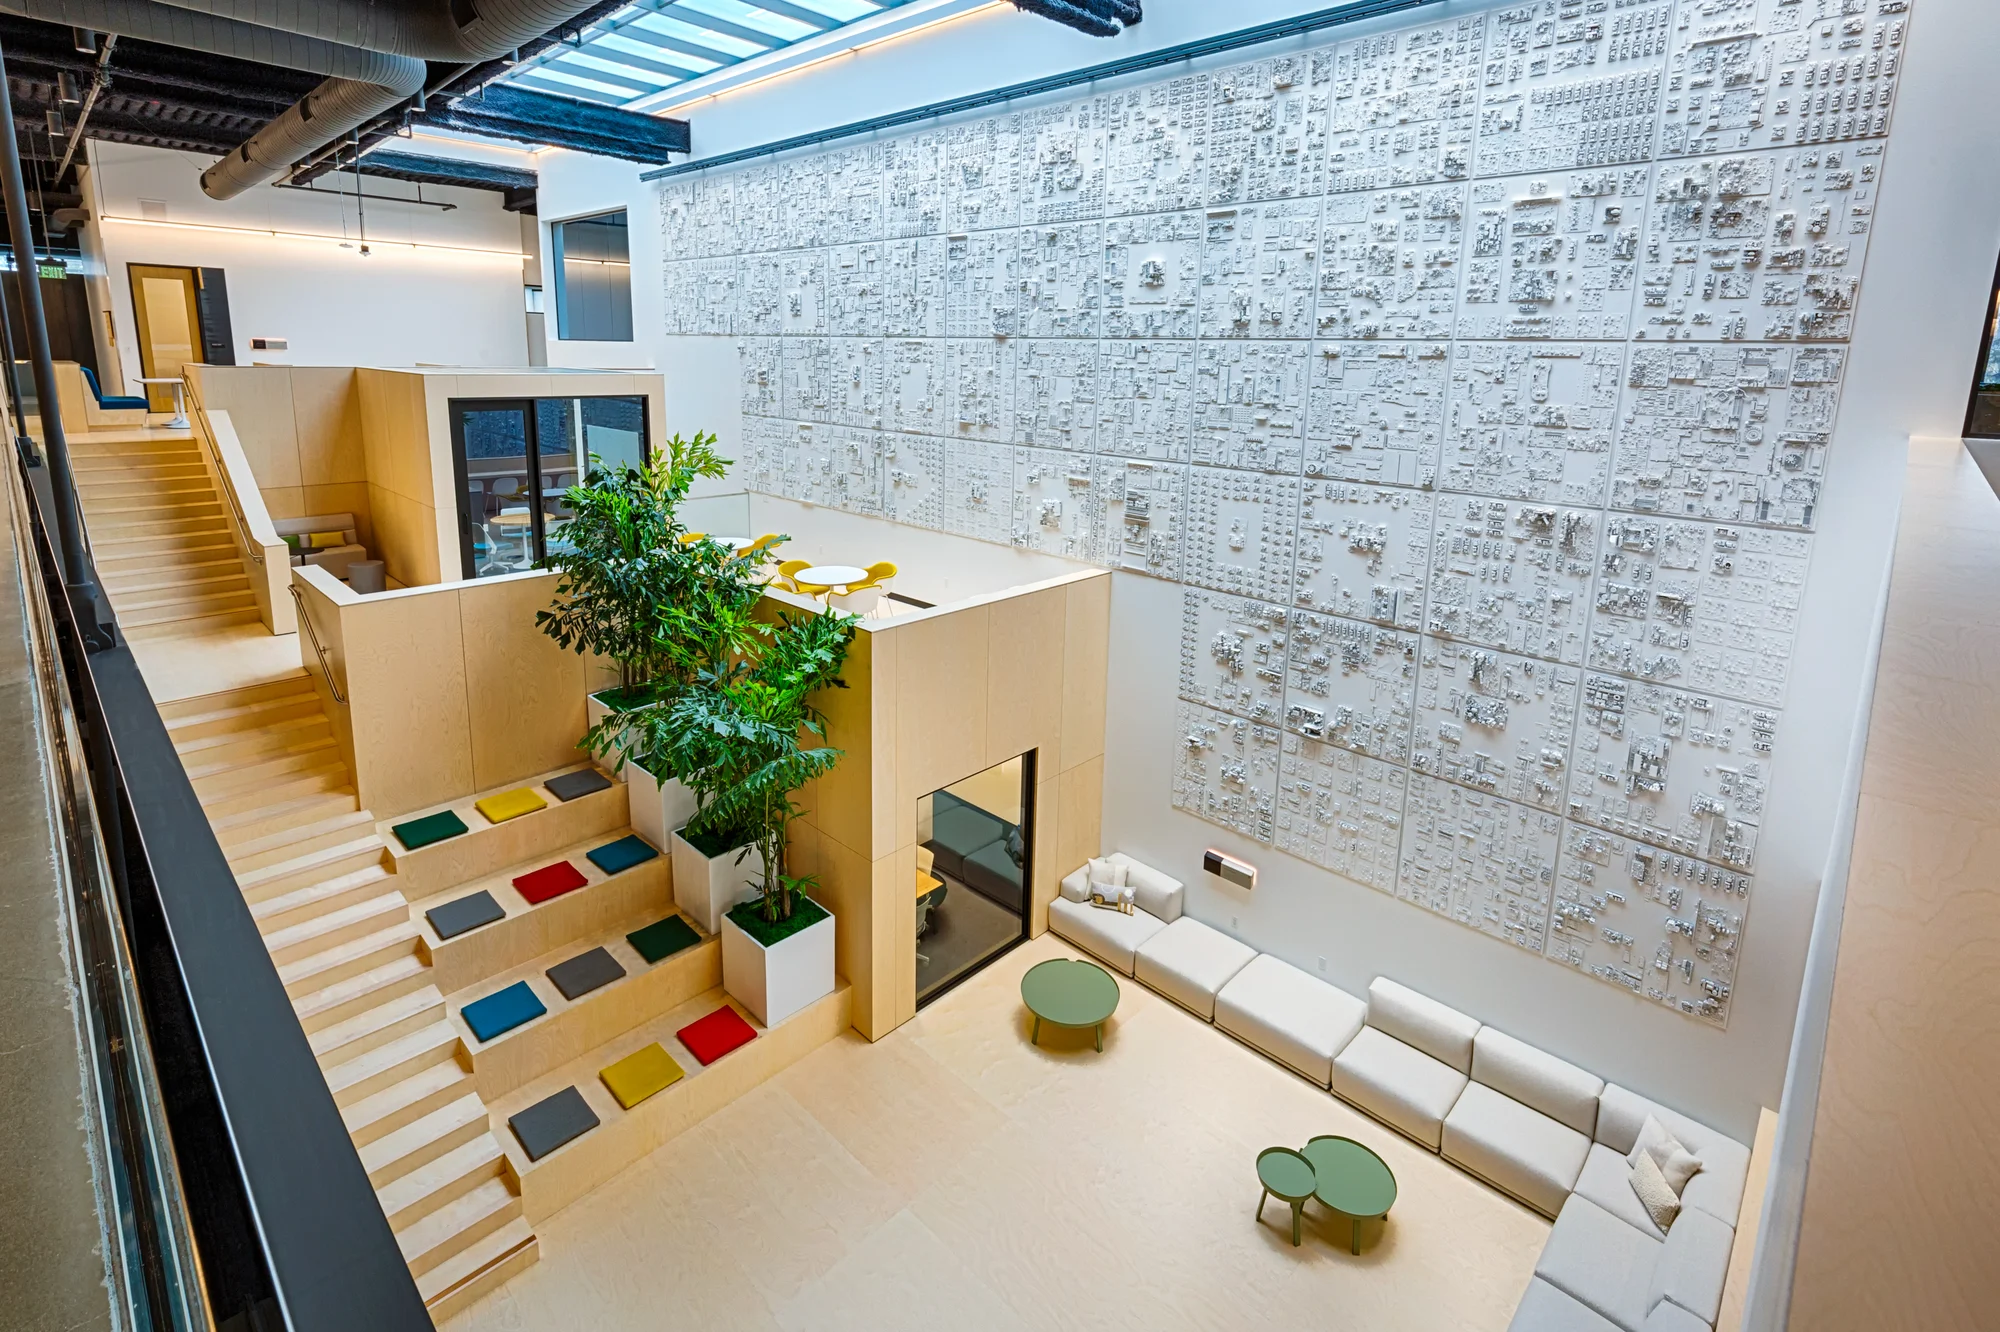 Inside the building there are multiple levels of seating, including amphitheater seating, a large sectional couch and small tables with chairs. The space is open and airy and punctuated with colored cushions and large potted plants. One of the walls is covered in white paneling made out of circuit boards.